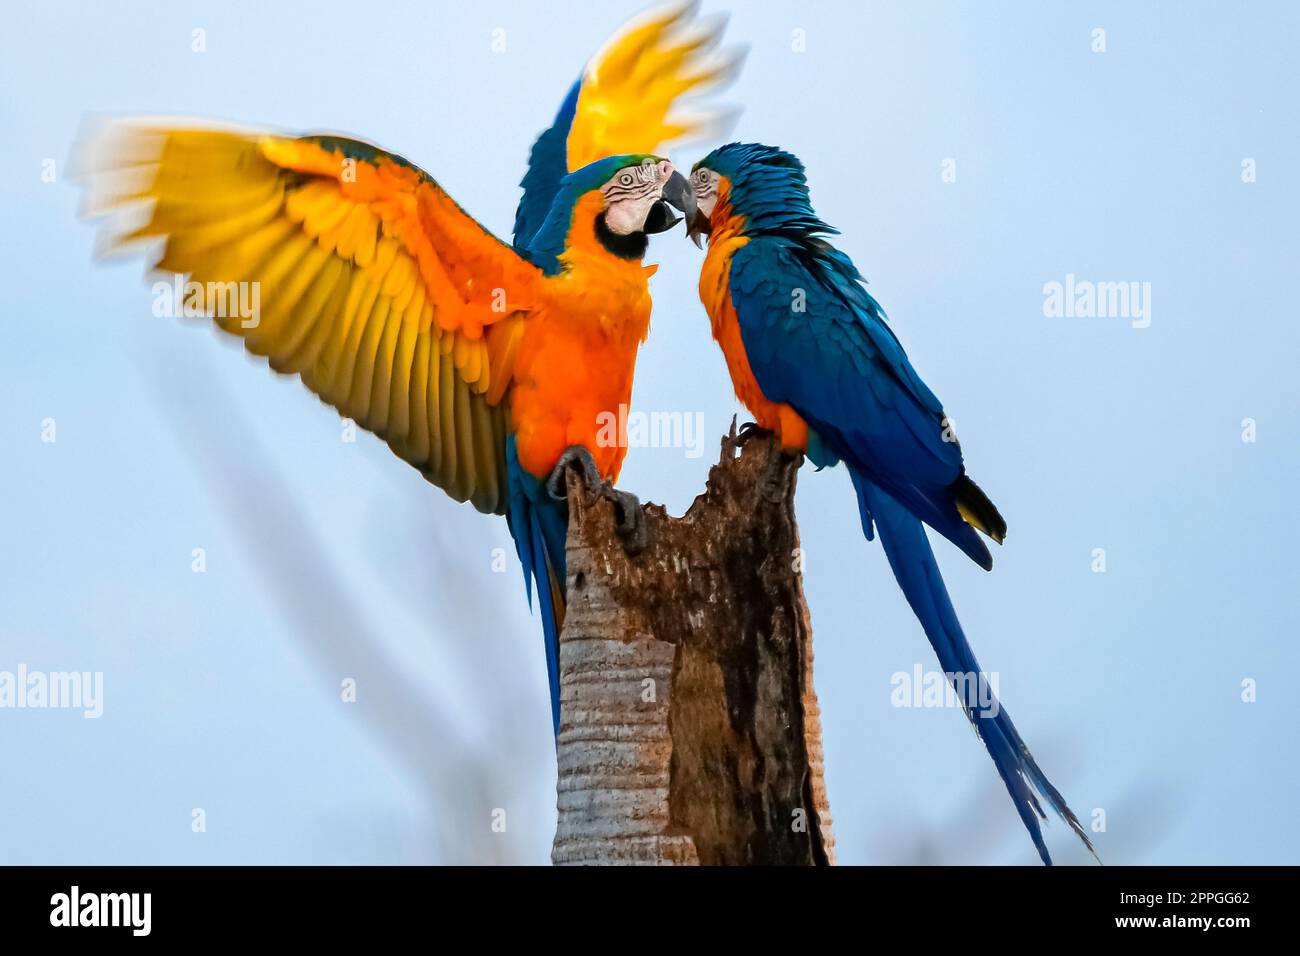 Close-up of two Blue-and-yellow macaws sitting on a palm tree stump, facing each other, one is spreading its wings, against blue sky, Amazonia, San Jo Stock Photo